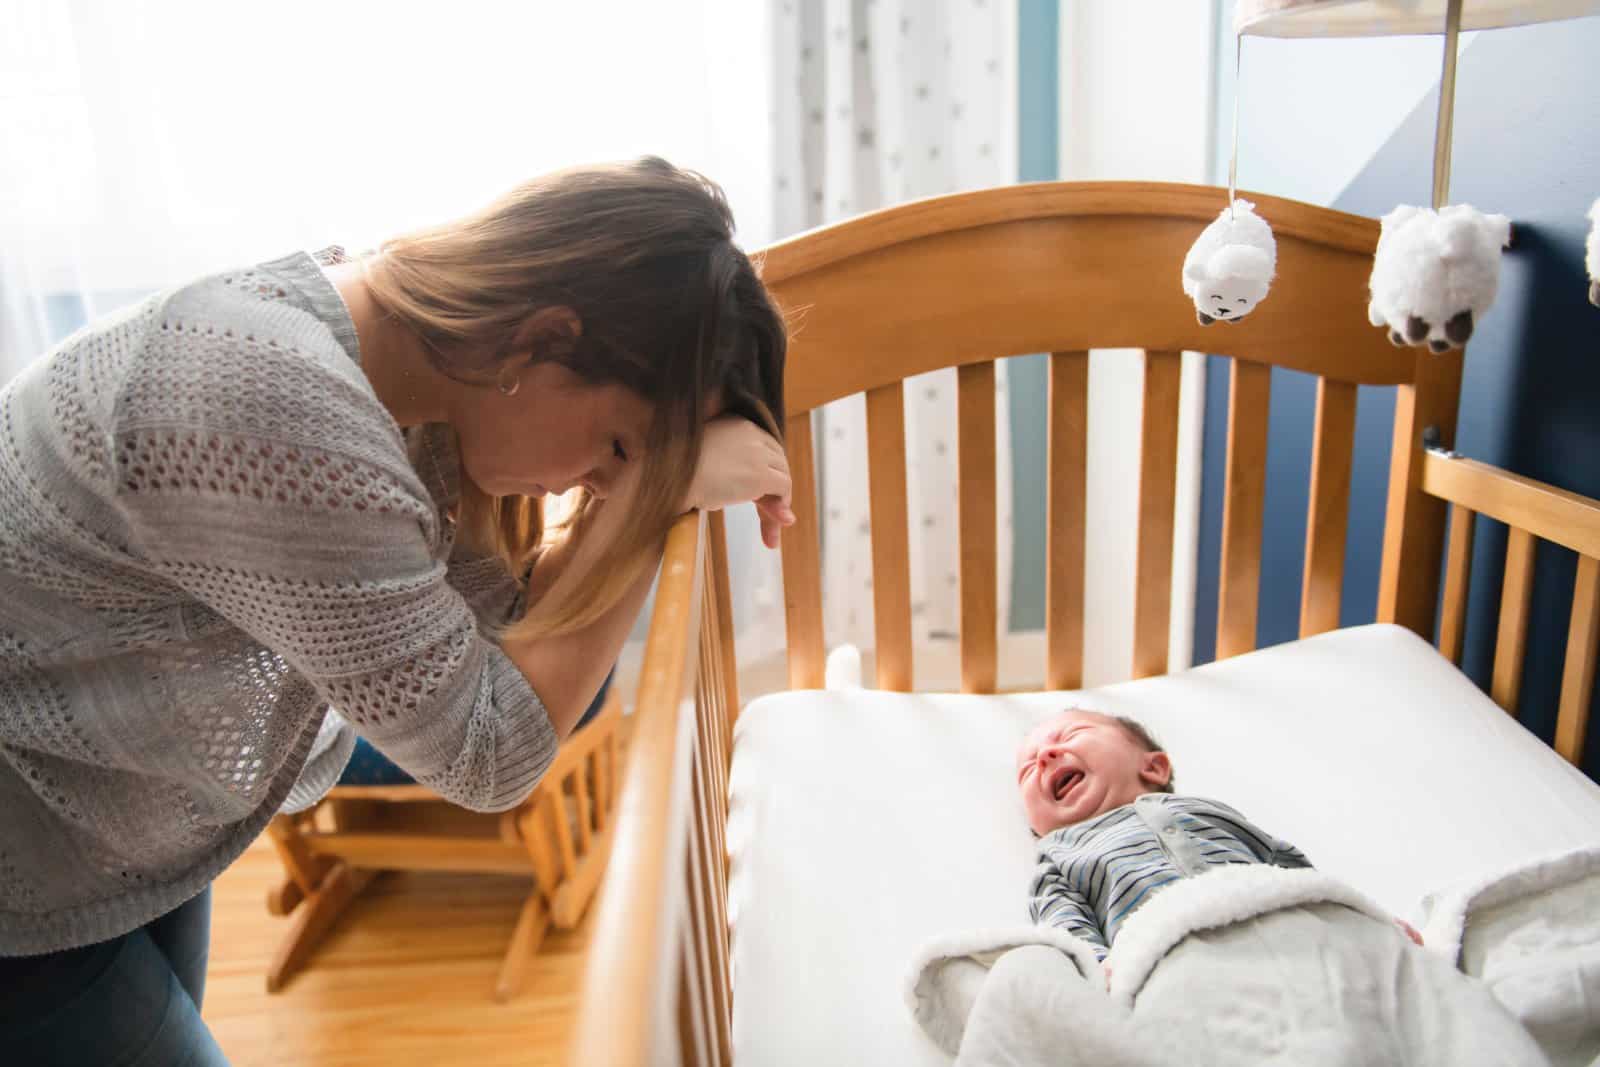 Image Credit: Shutterstock / Lopolo <p><span>Moms often carry the invisible burden of the mental load—managing household tasks, schedules, and emotional support. This unseen labor is exhausting and rarely shared equally.</span></p>